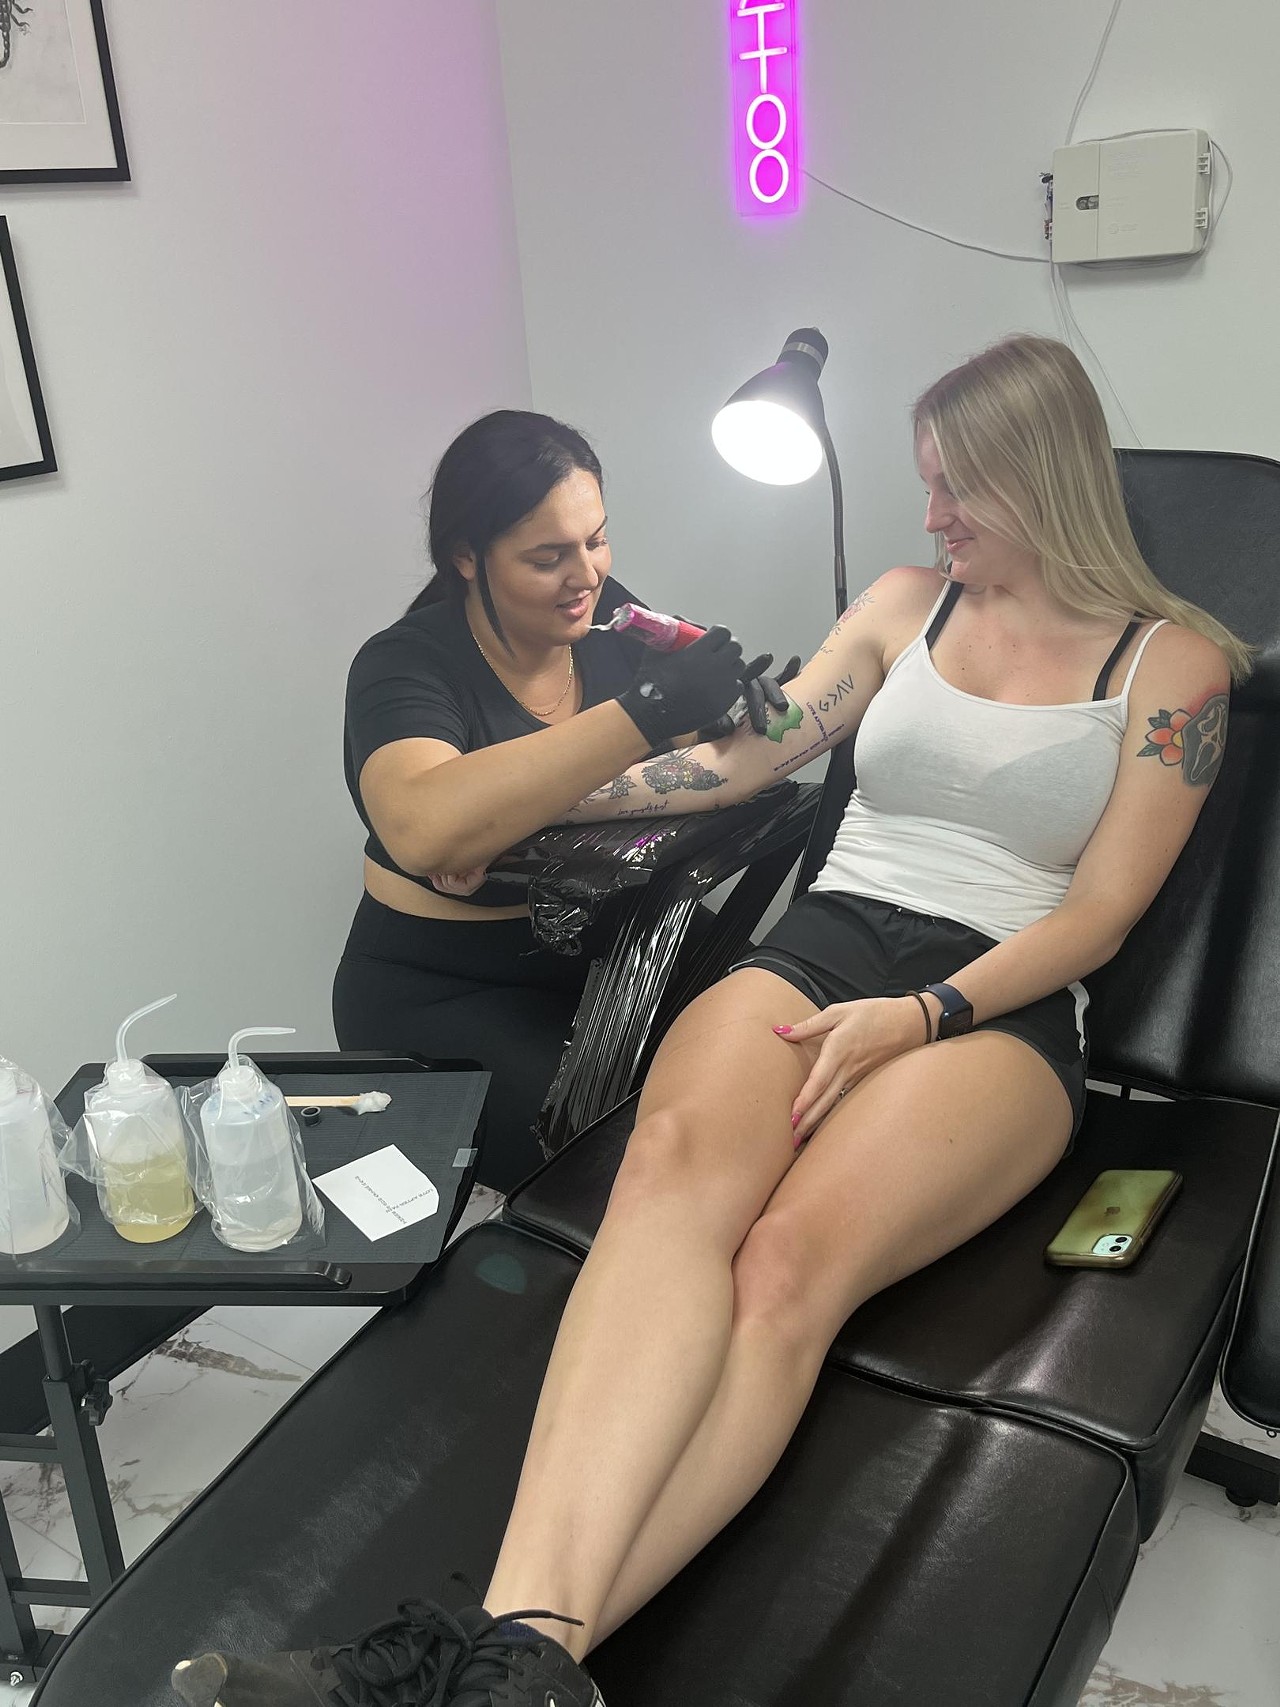 Azra Selimovic
Azra opened one of the first Bosinian-owned tattoo shops in St. Louis in 2023. She specializes in fine line tattoos but is always looking for a challenge.
Shop details: Azara Tattoos (8005 Mackenzie Road, Affton; 314-755-0176); open 12 p.m. to 8 p.m. Tuesday through Saturday and 12 p.m. to 6 p.m. Sunday&nbsp;
Appointments or Walk-ins: Appointment only but does do walk-in consultations
Years tattooing: 5
Specialty: Fine line but willing to take on a wide variety of tattoo styles
To note:
No minors, 18 and older&nbsp;
No eyeball or eyelid tattoos
$$$: Shop minimum is $100 or $180 an hour
Best way to contact: Come into the shop